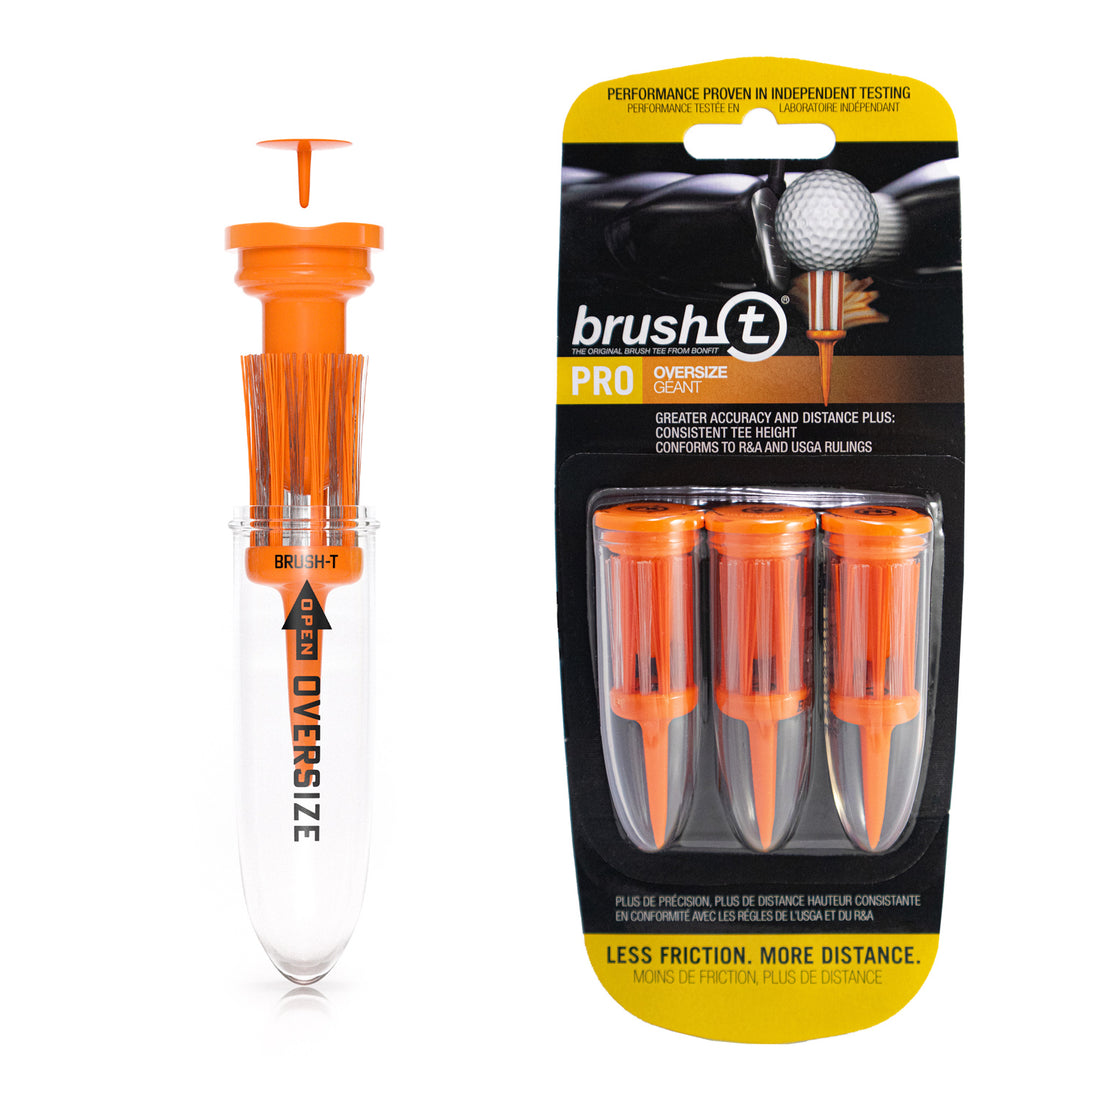 product image for orange oversize performance brush tee by brush-t the innovative golf accessory company that makes unbreakable plastic golf tees.